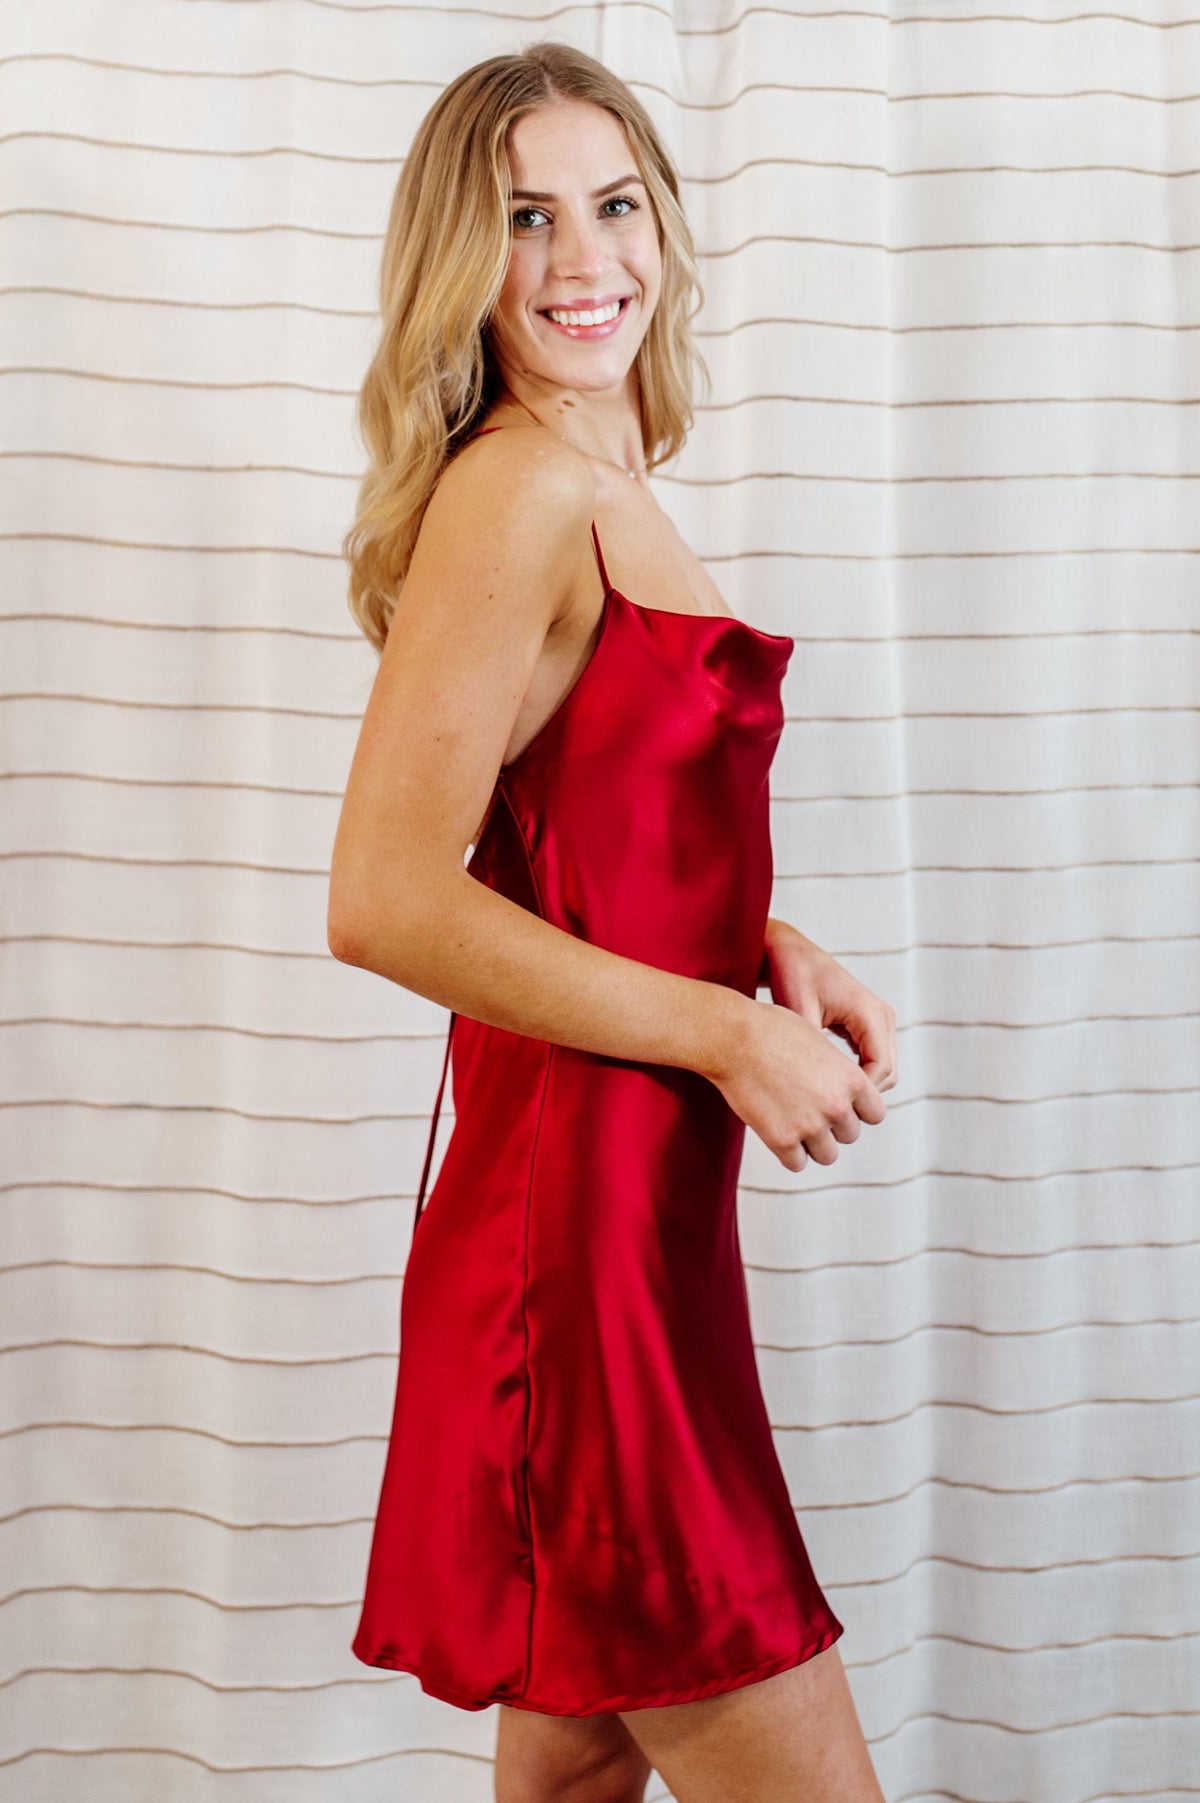 Red, silky satin slip mini dress with cowl neck and flowy skirt on model.